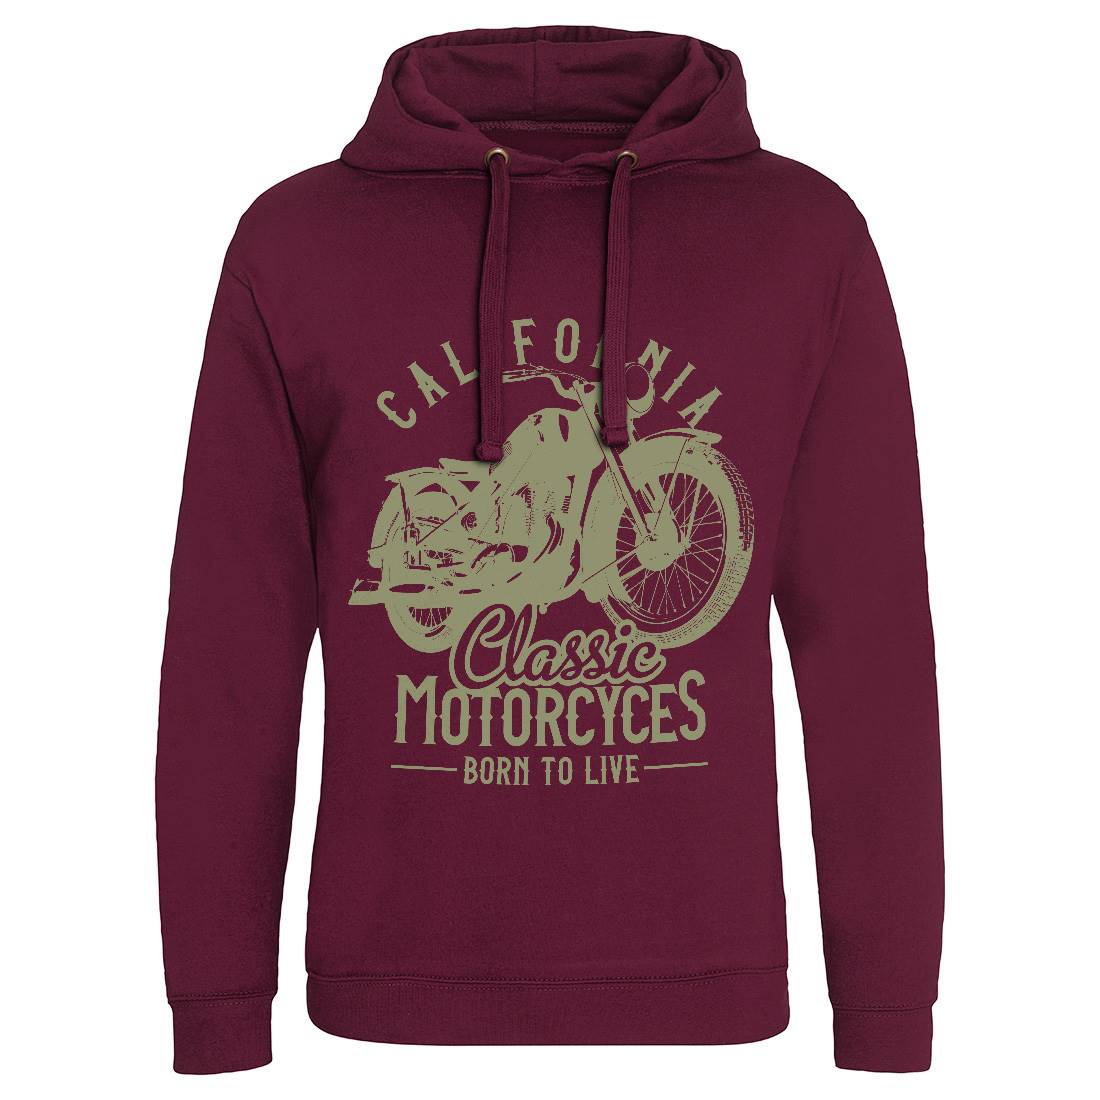 California Mens Hoodie Without Pocket Motorcycles B316